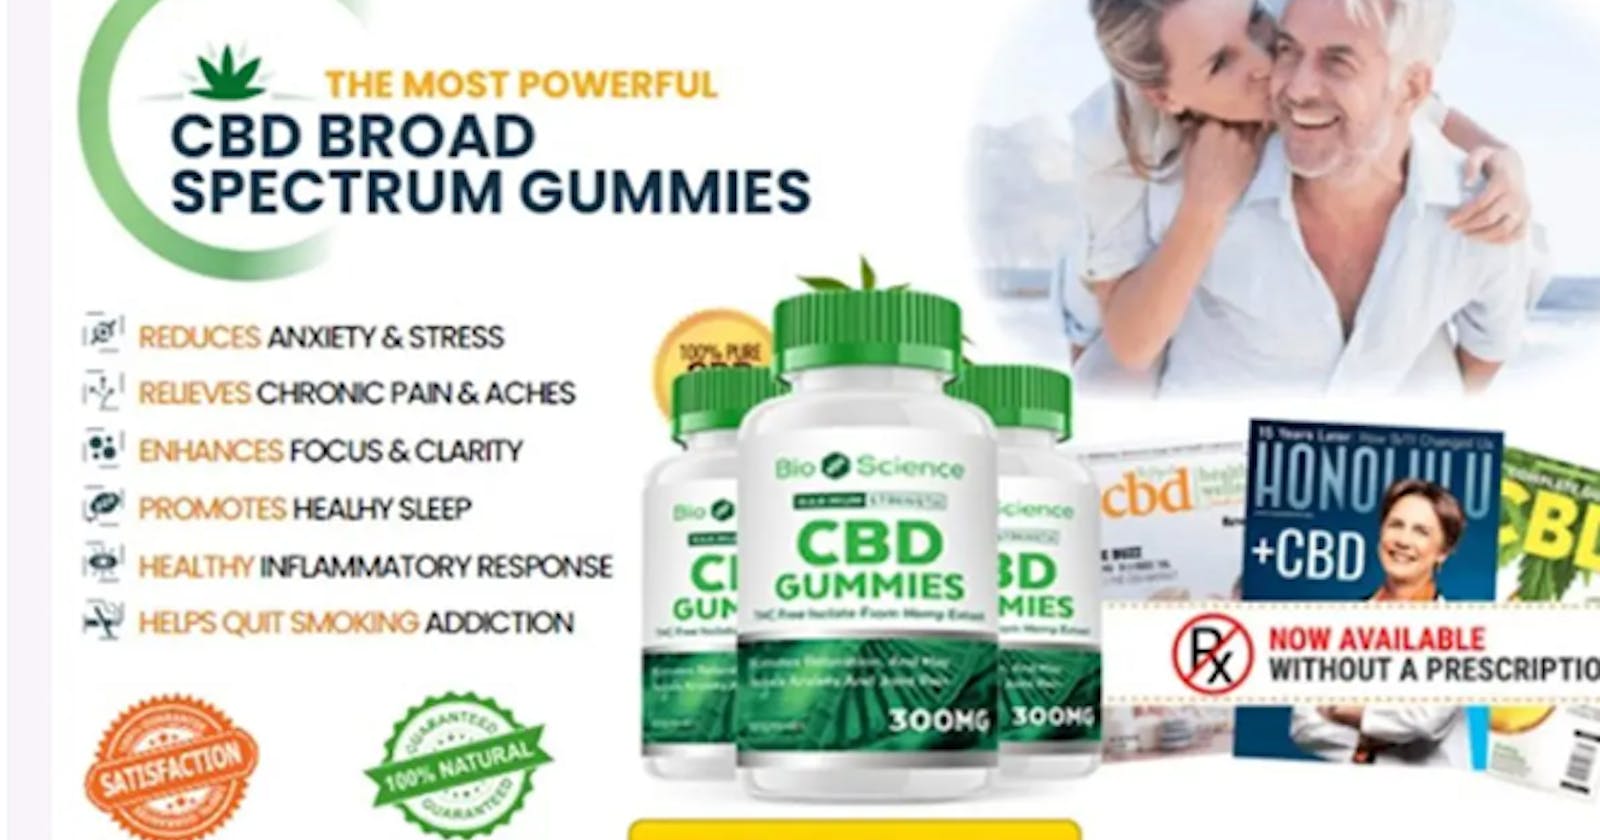 BioScience CBD Gummies Reviews - Does It Work? Ingredients & Side Effects! (Crucial Report)